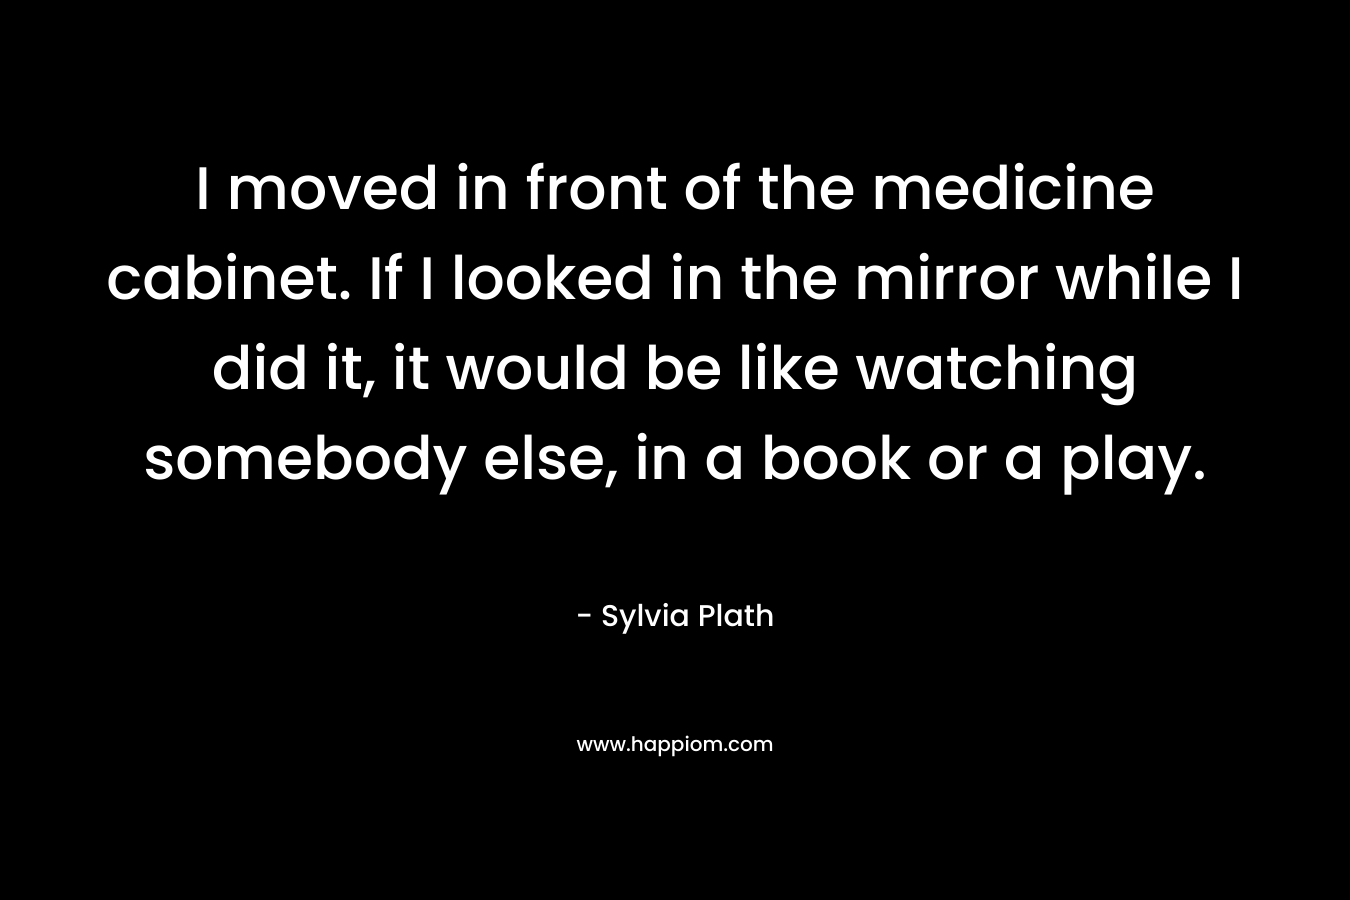 I moved in front of the medicine cabinet. If I looked in the mirror while I did it, it would be like watching somebody else, in a book or a play. – Sylvia Plath